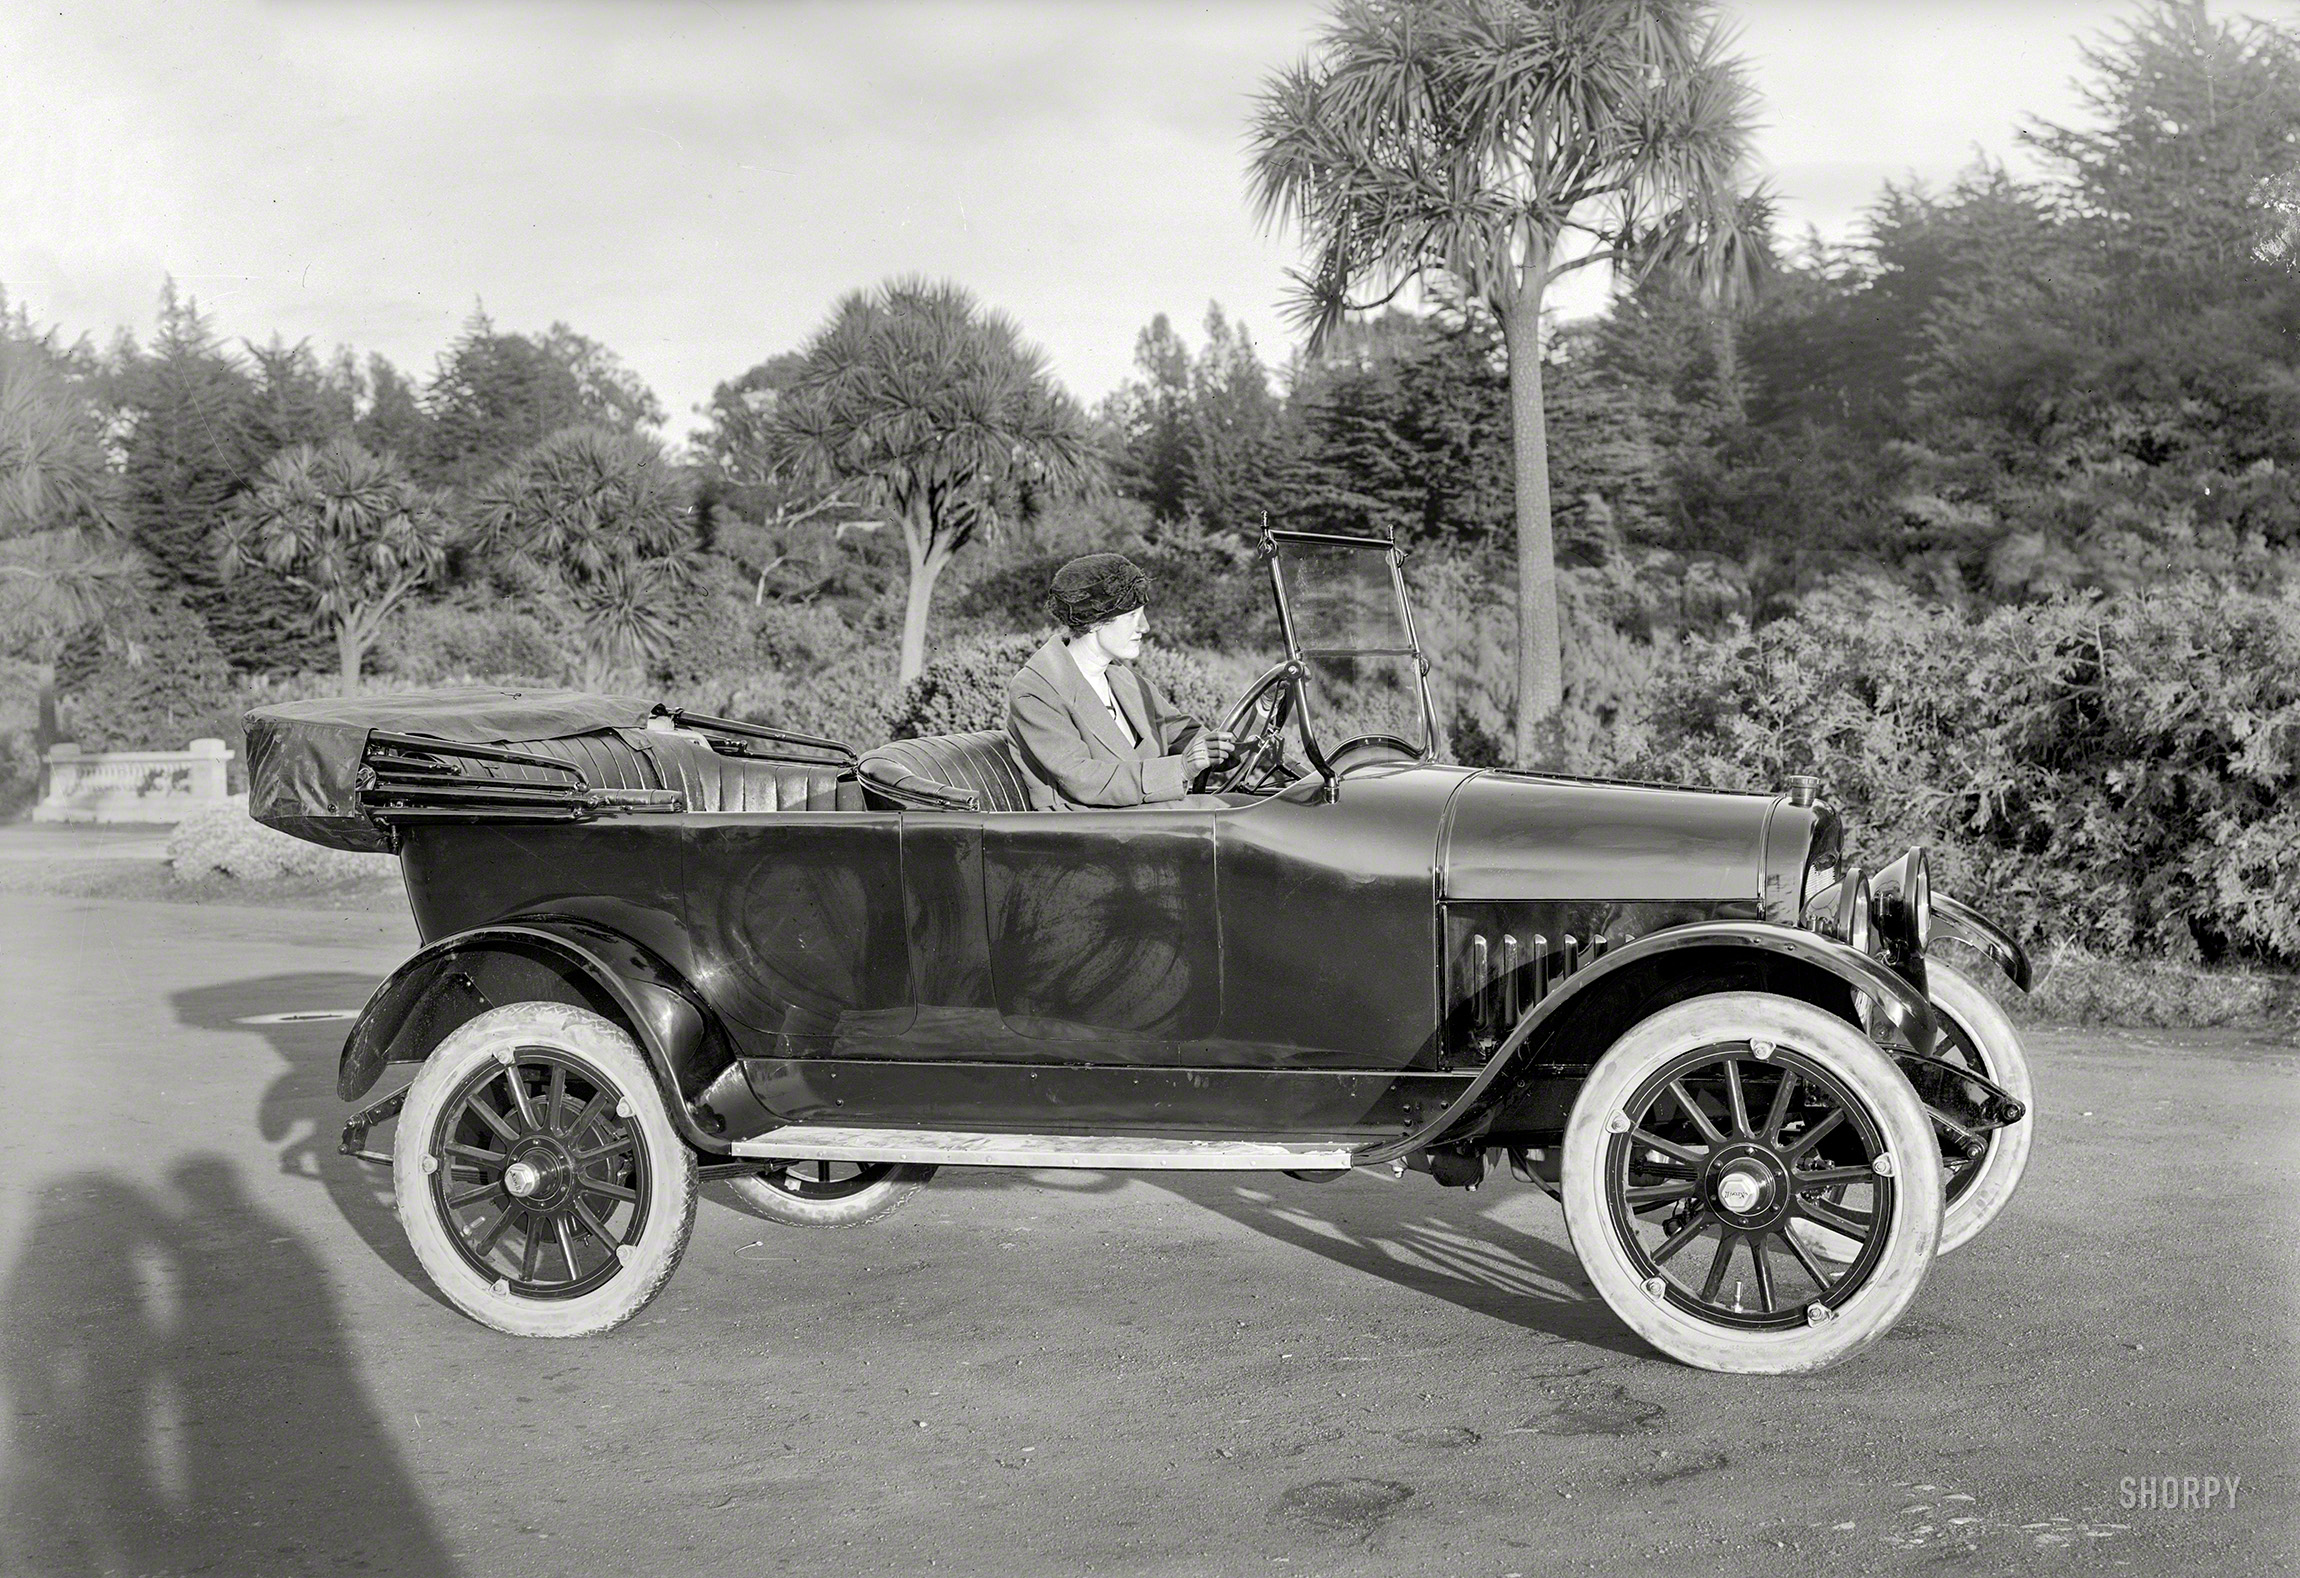 San Francisco circa 1919. "Maxwell touring car" is the latest entrant in the Shorpy Festival of Forgotten Phaetons. 5x7 inch glass negative. View full size.